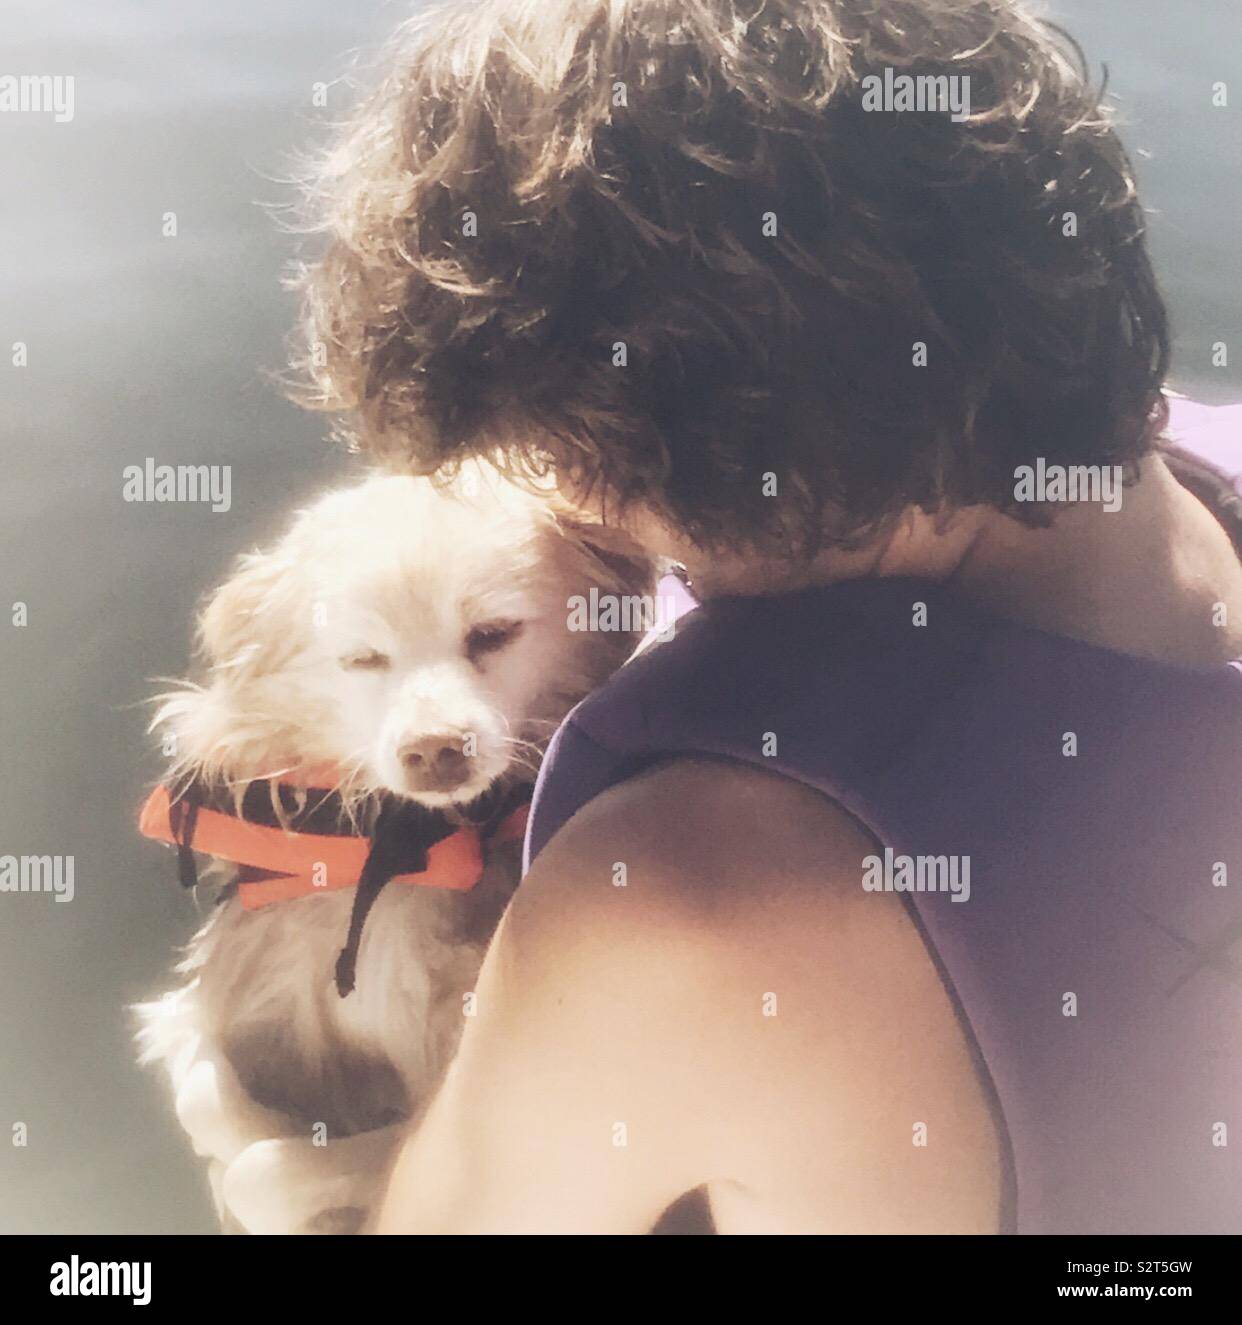 Boy and his dog boating. Boy and dog wearing life jackets and boy is holding dog close to his chest looking down on fluffy dog Stock Photo